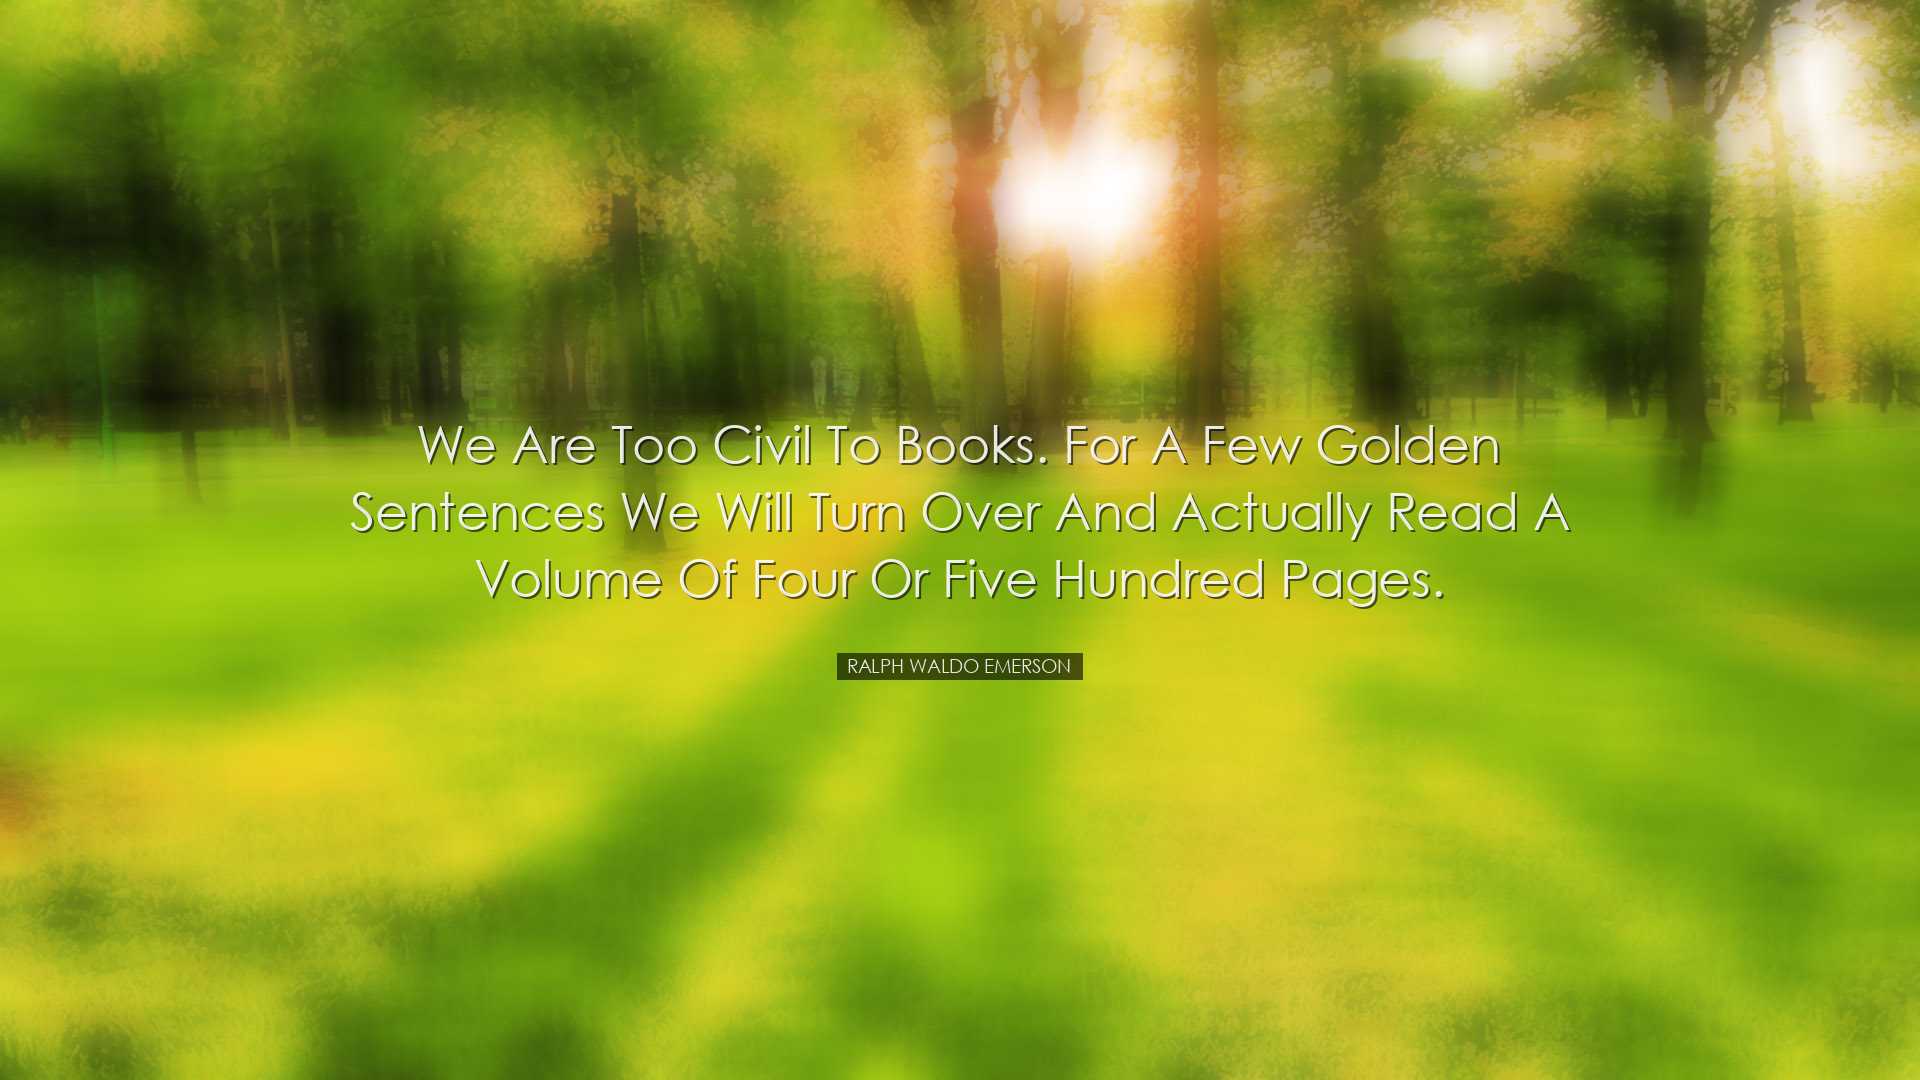 We are too civil to books. For a few golden sentences we will turn